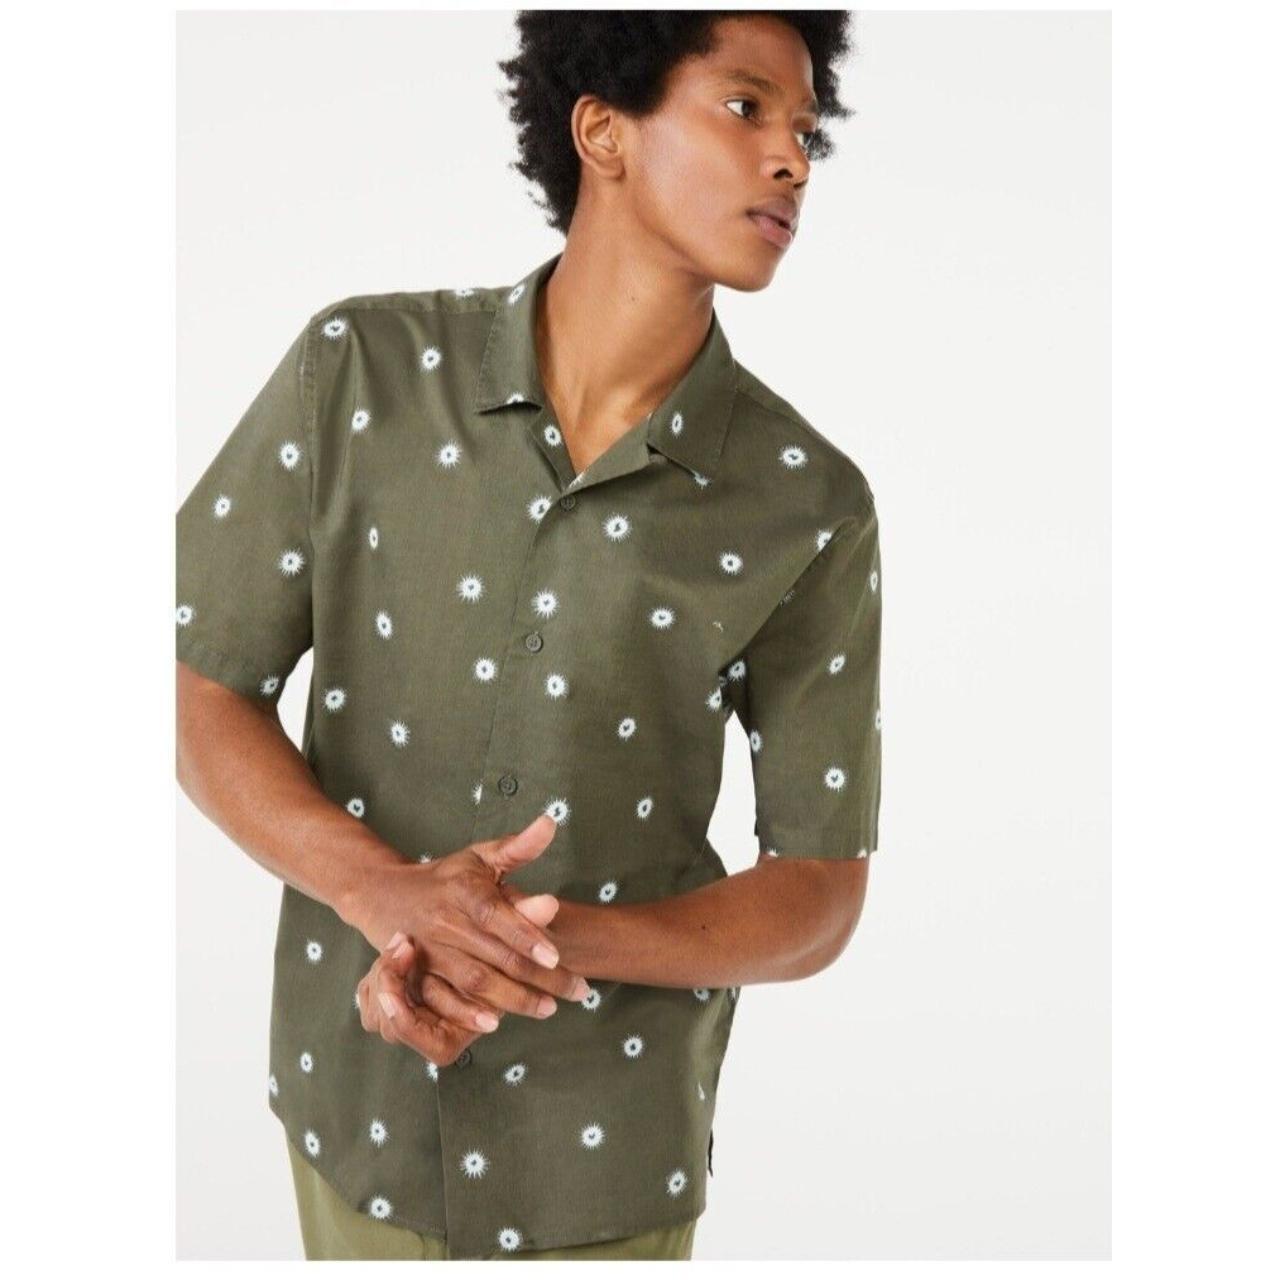 Free Assembly Men's Button Down Shirts